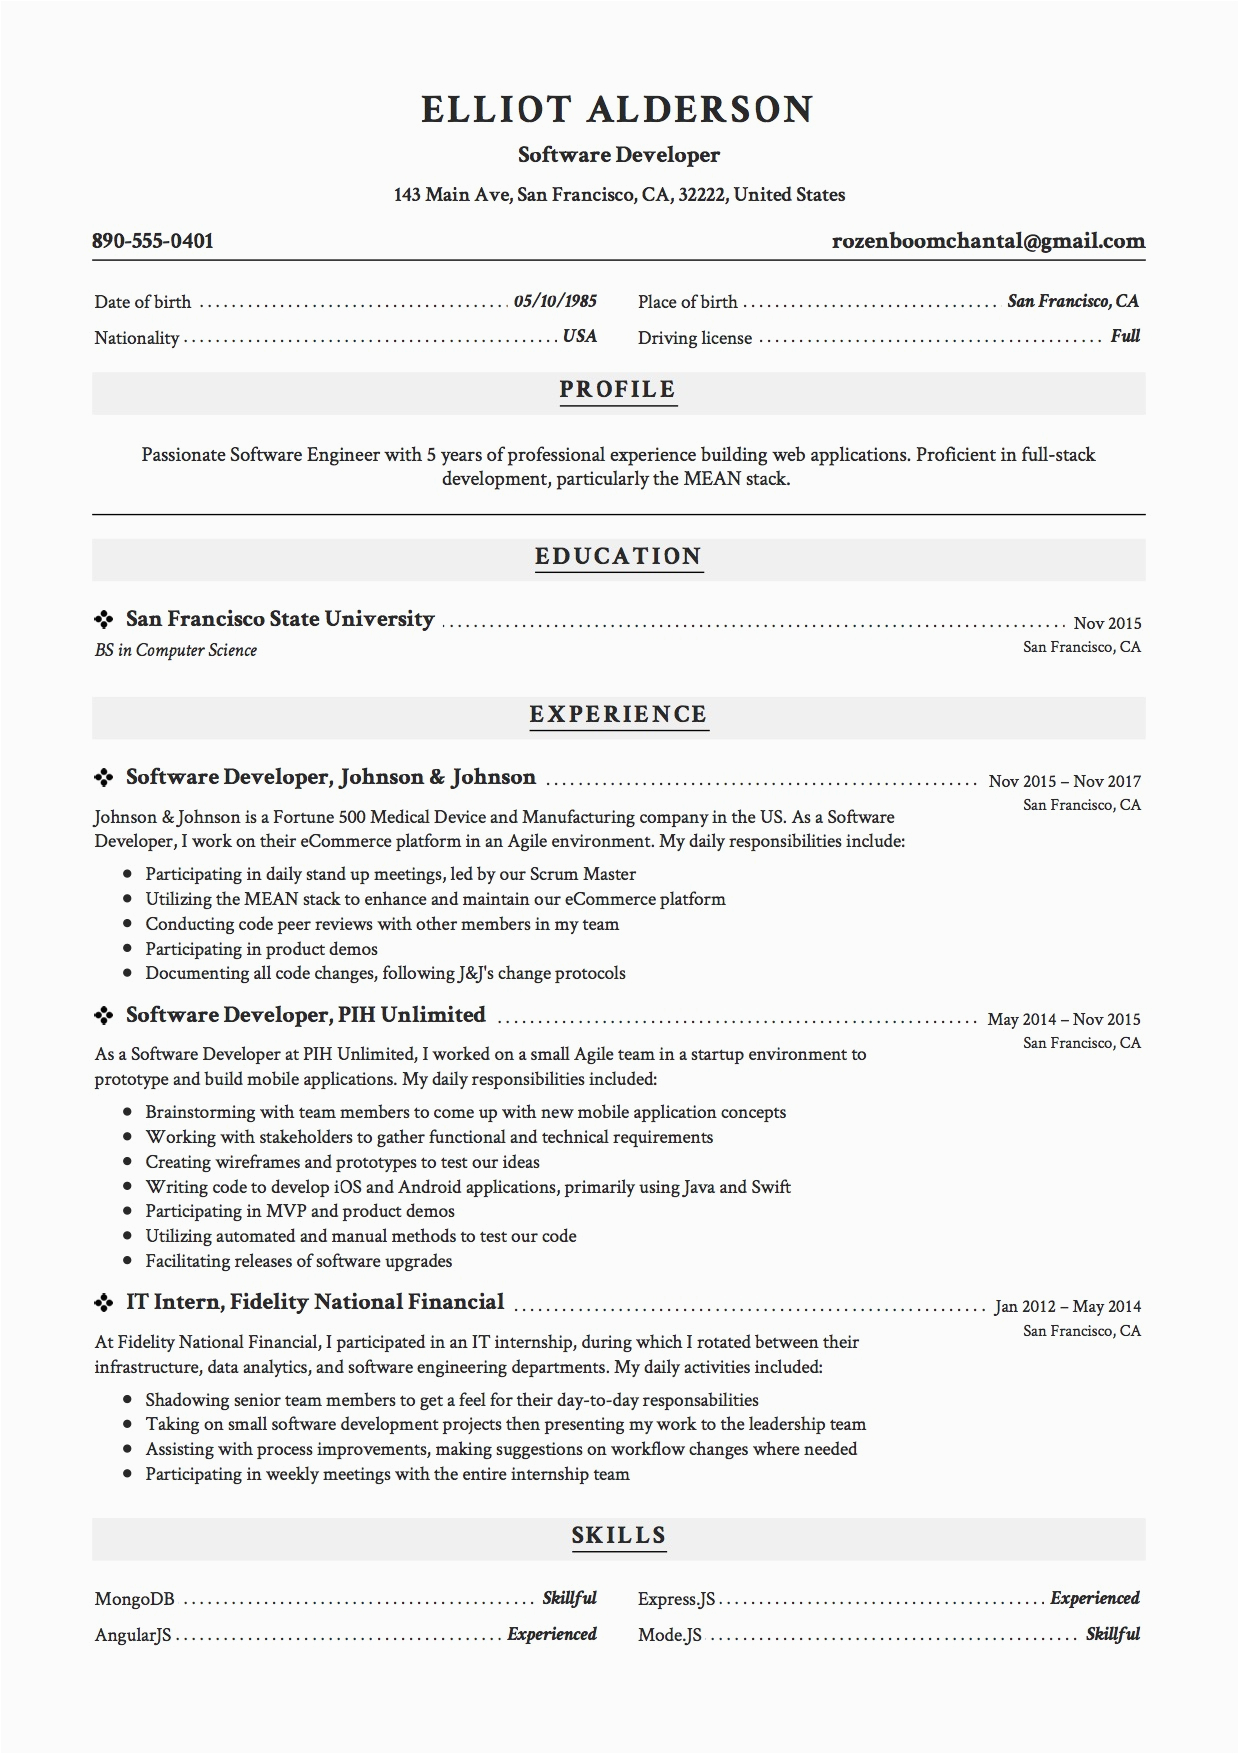 Resume Template for 3 Years Experience Sample Resume for software Engineer with 3 Years